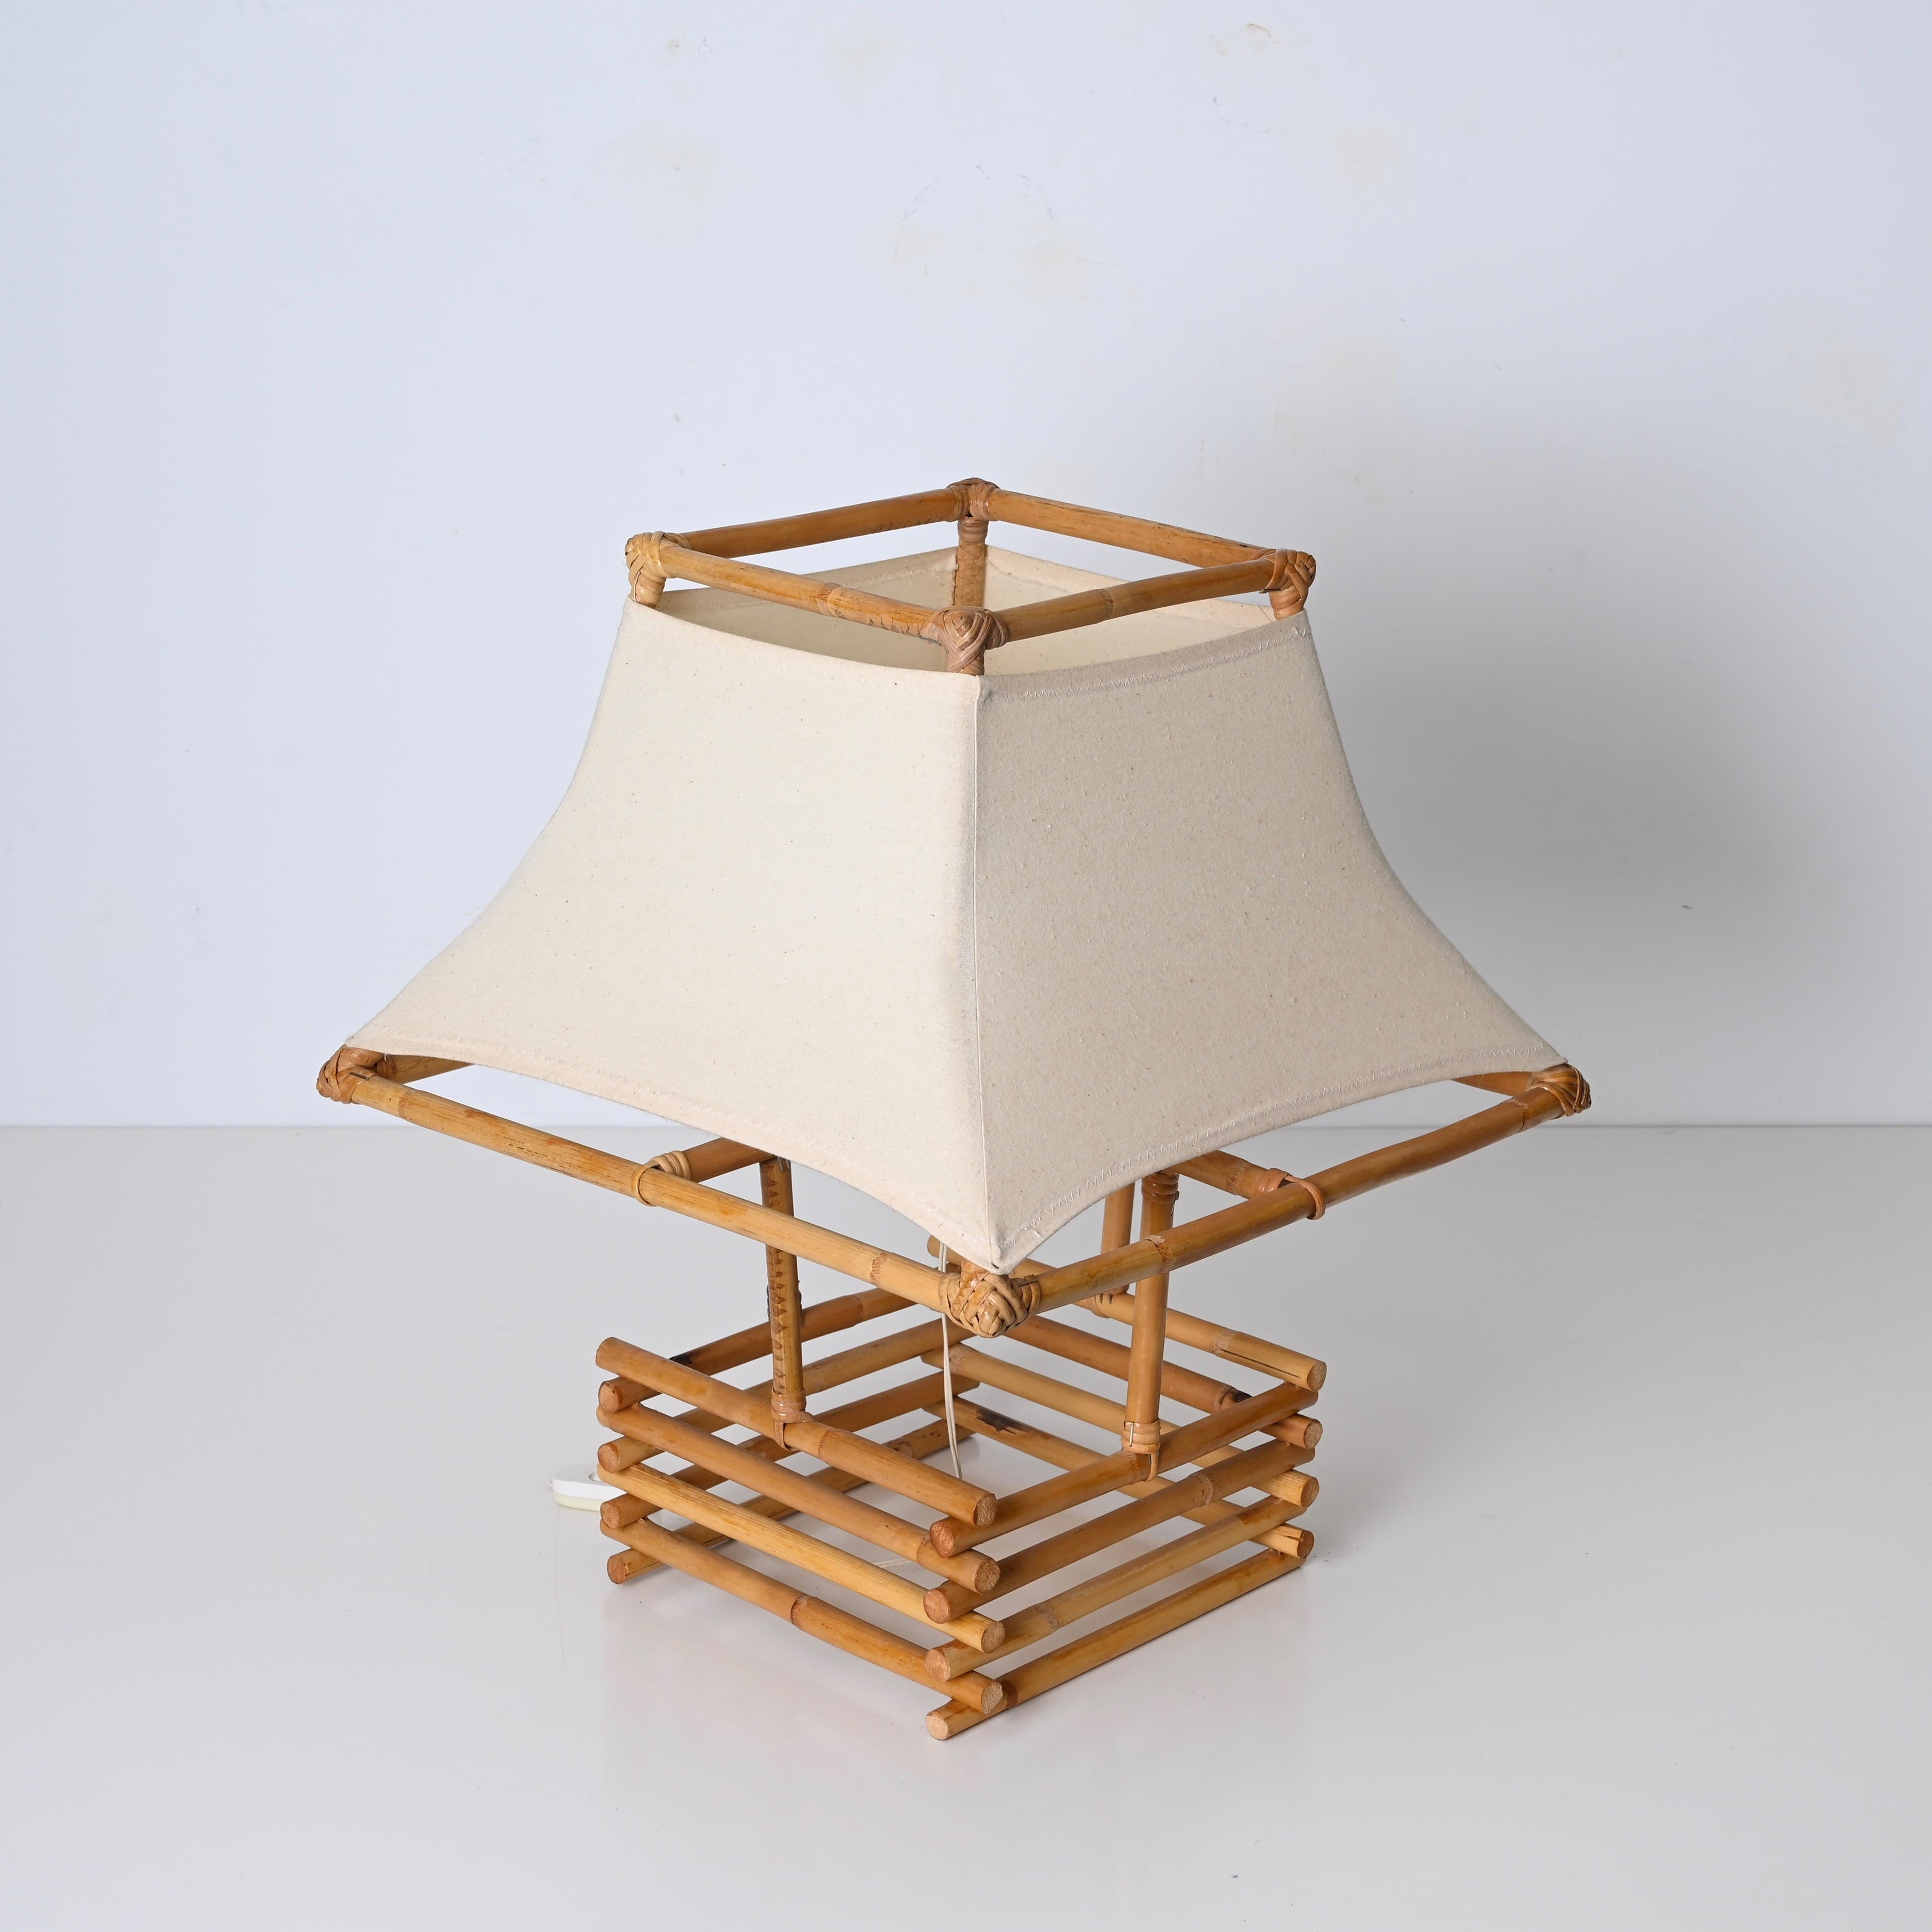 Louis Sognot Rattan, Wicker and White Fabric Table Lamp, France 1960s For Sale 1